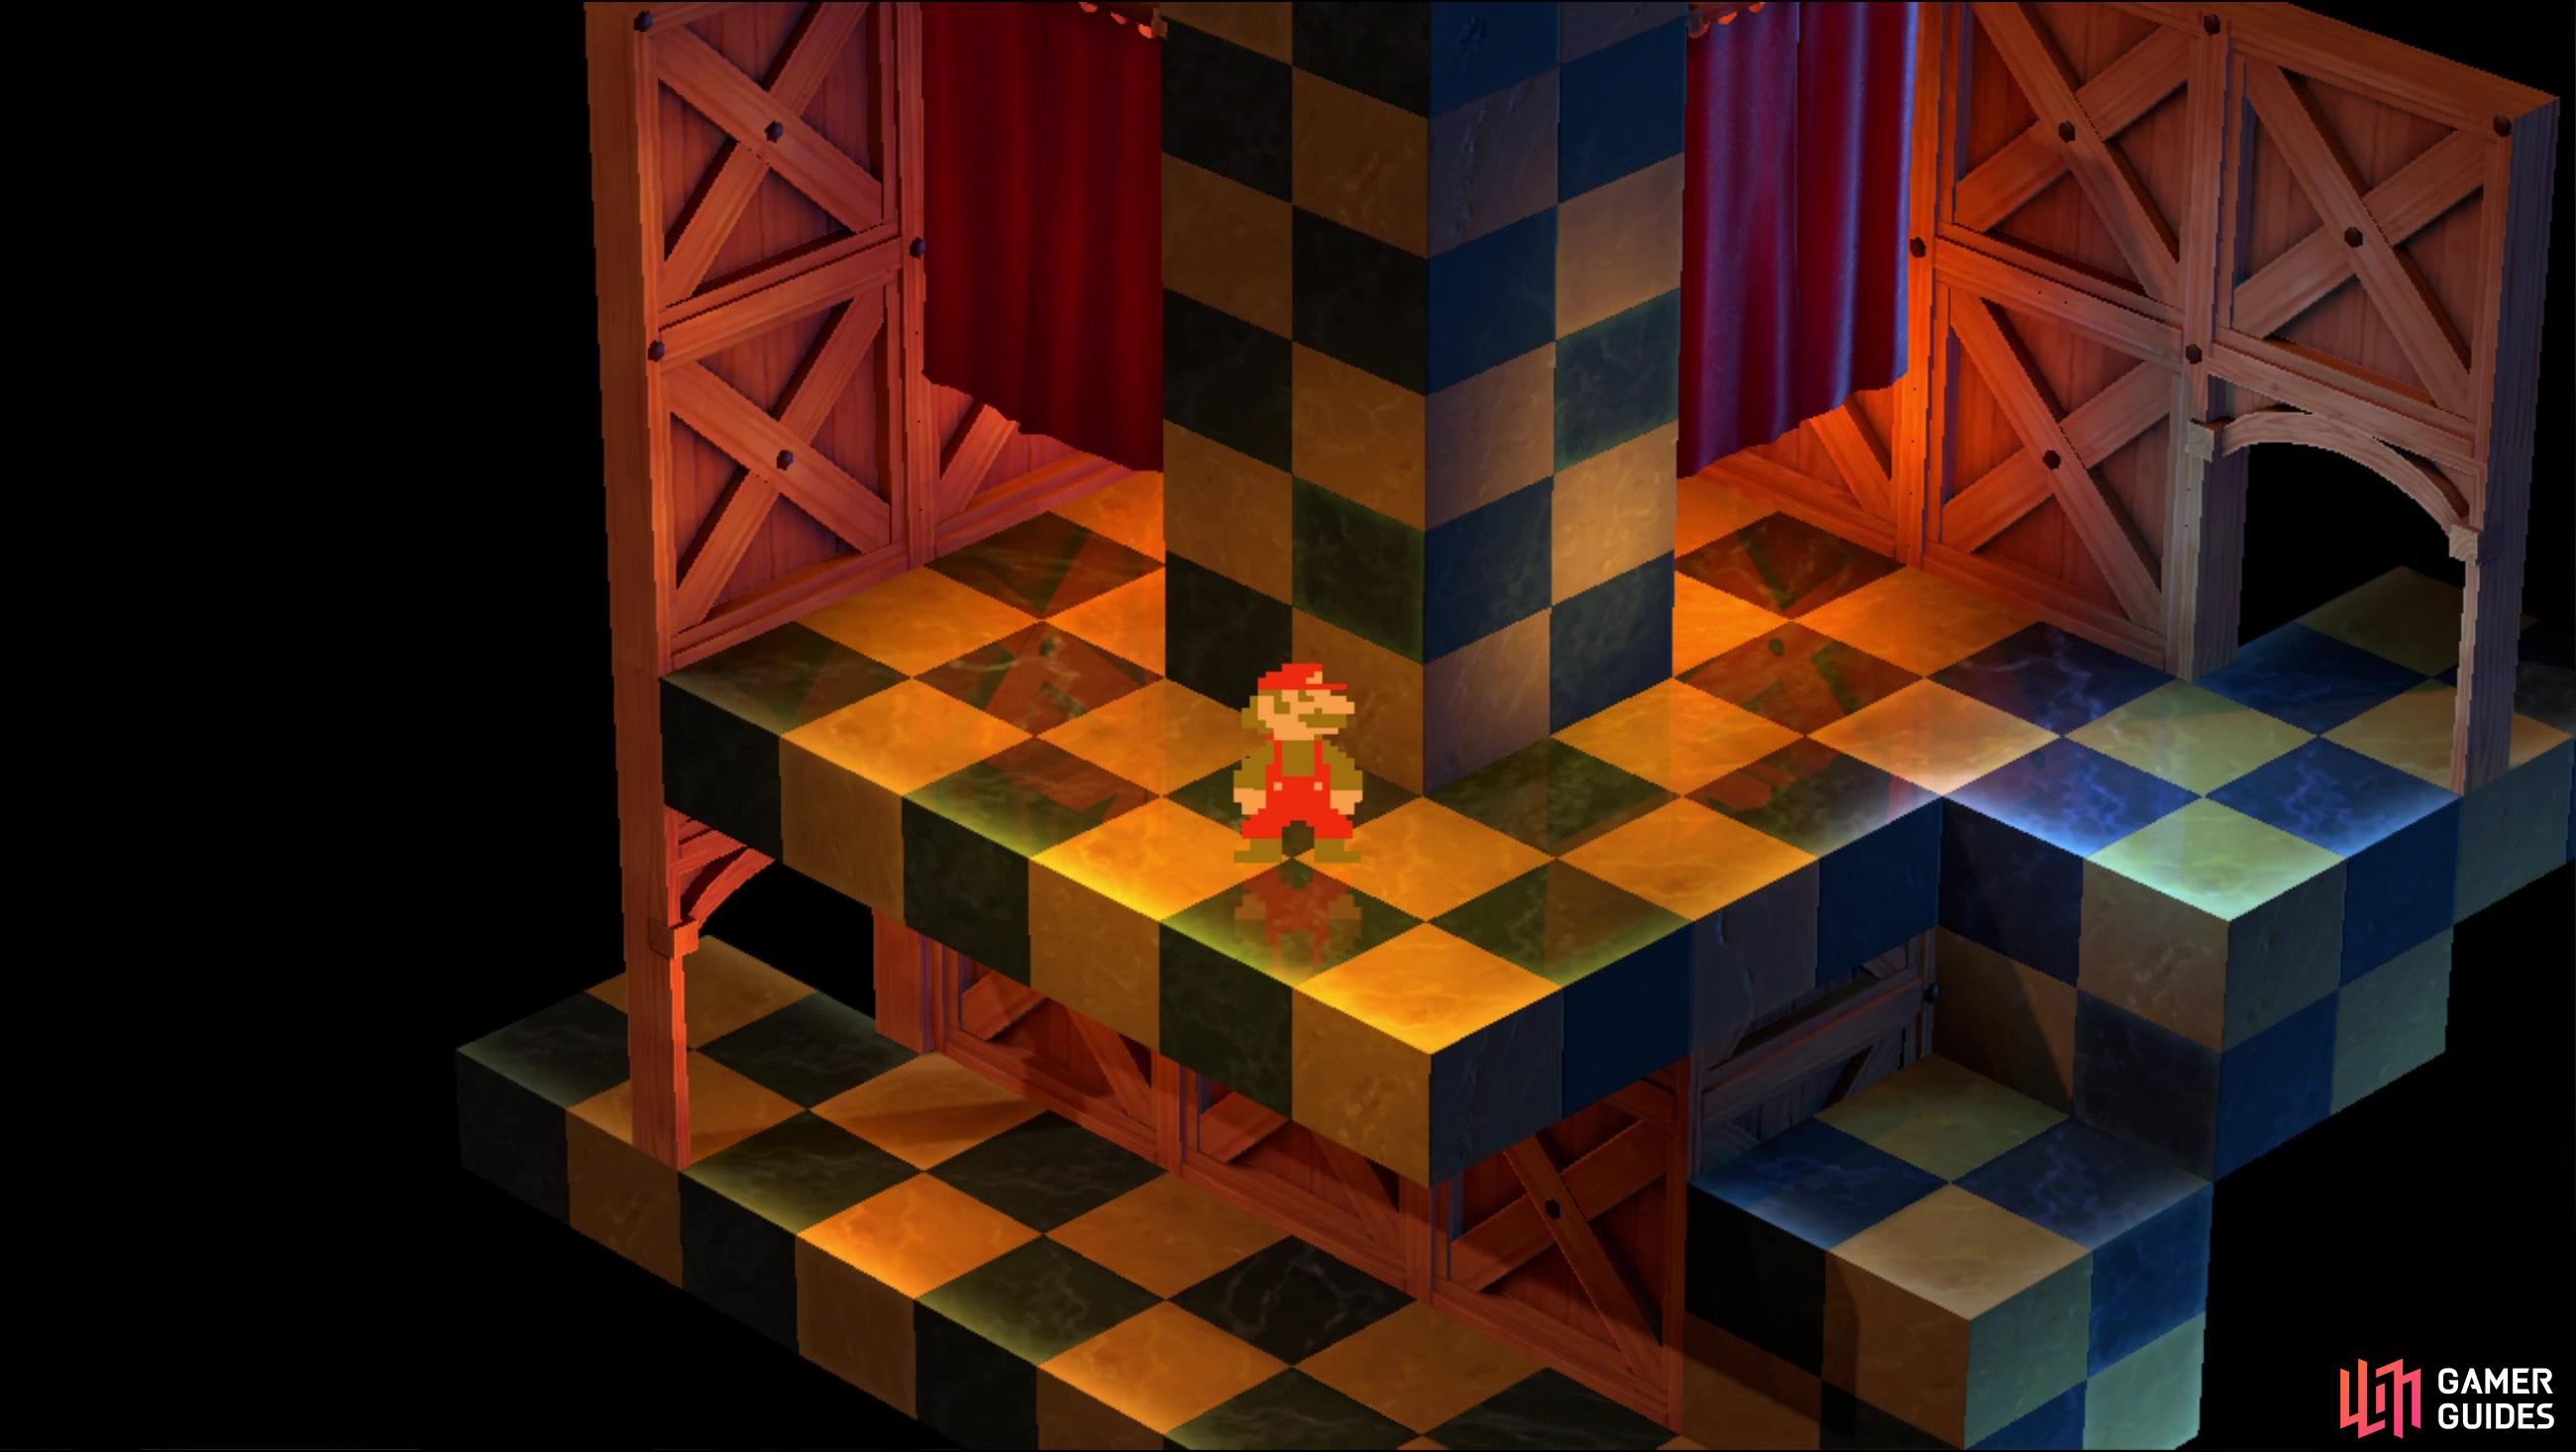 On the next floor you'll find an Easter egg - go through some curtains and Mario will adopt a more… retro look.